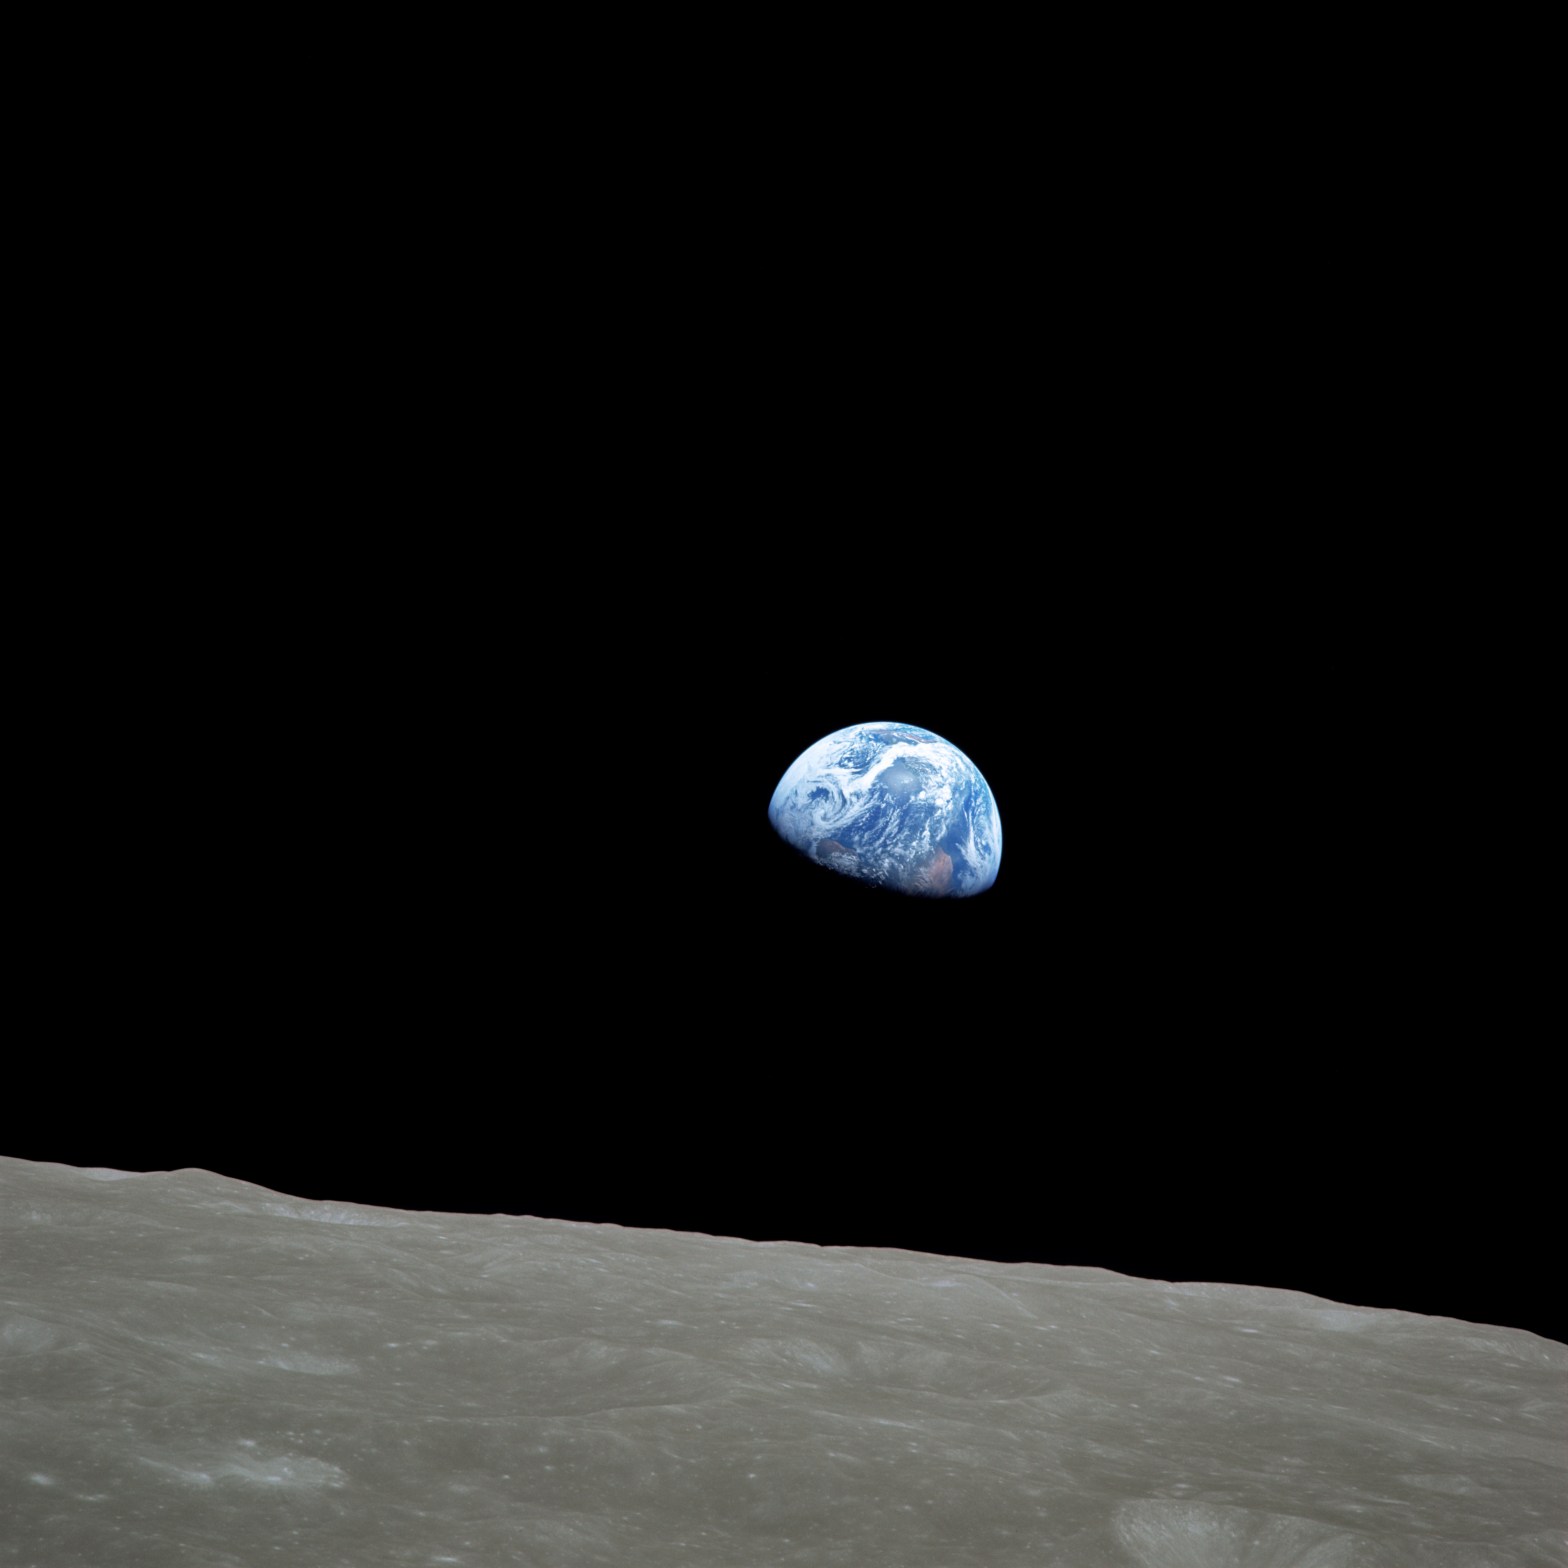 Bill Anders’ famous photograph of Earthrise became an iconic image of the Space Age — and a clarion call to the emerging environmental movement.